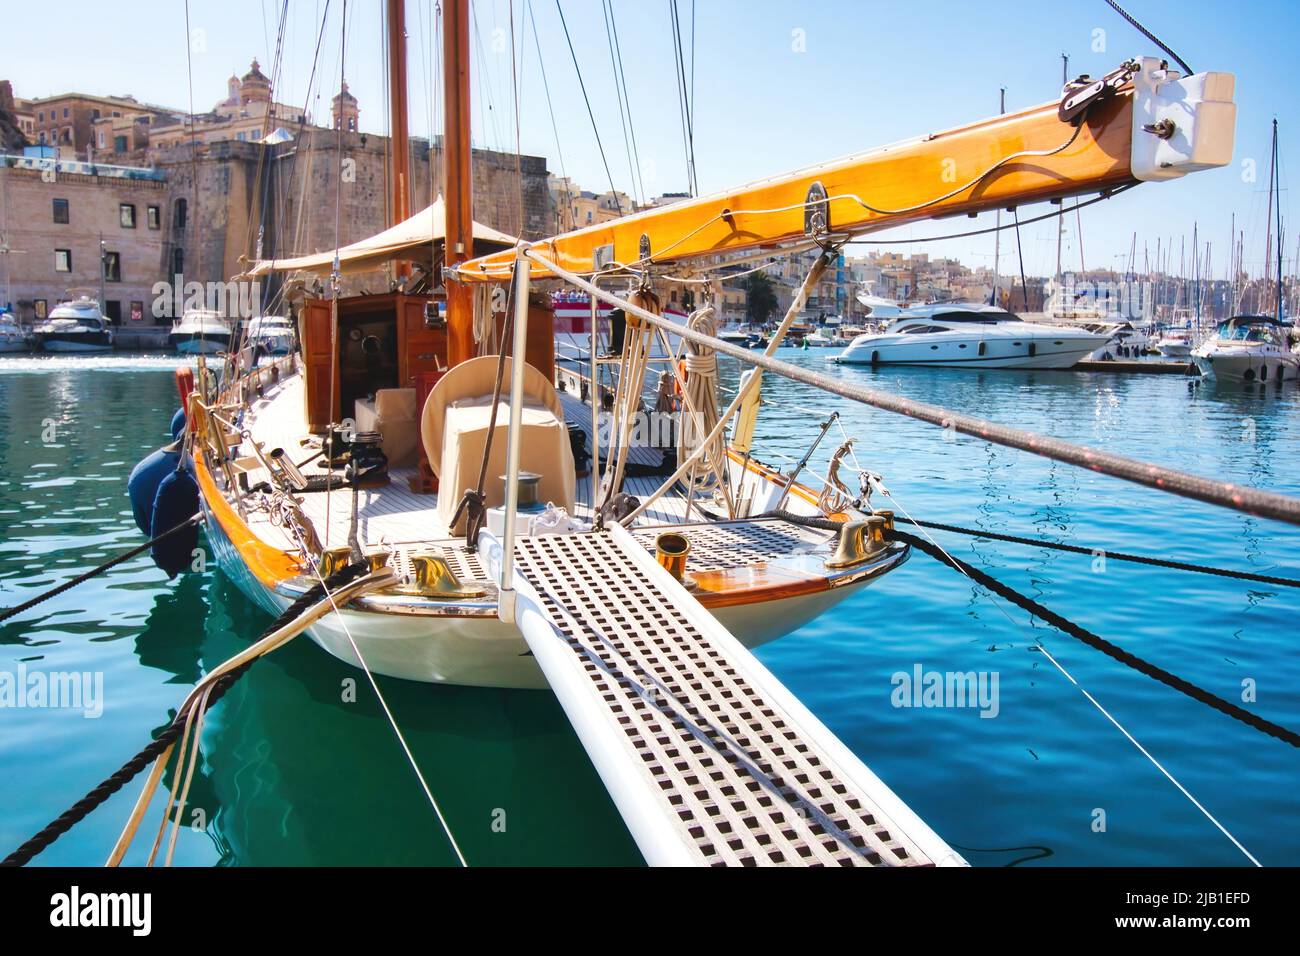 A luxury sailboat moored in a Mediterranean harbor with the gangplank extended Stock Photo